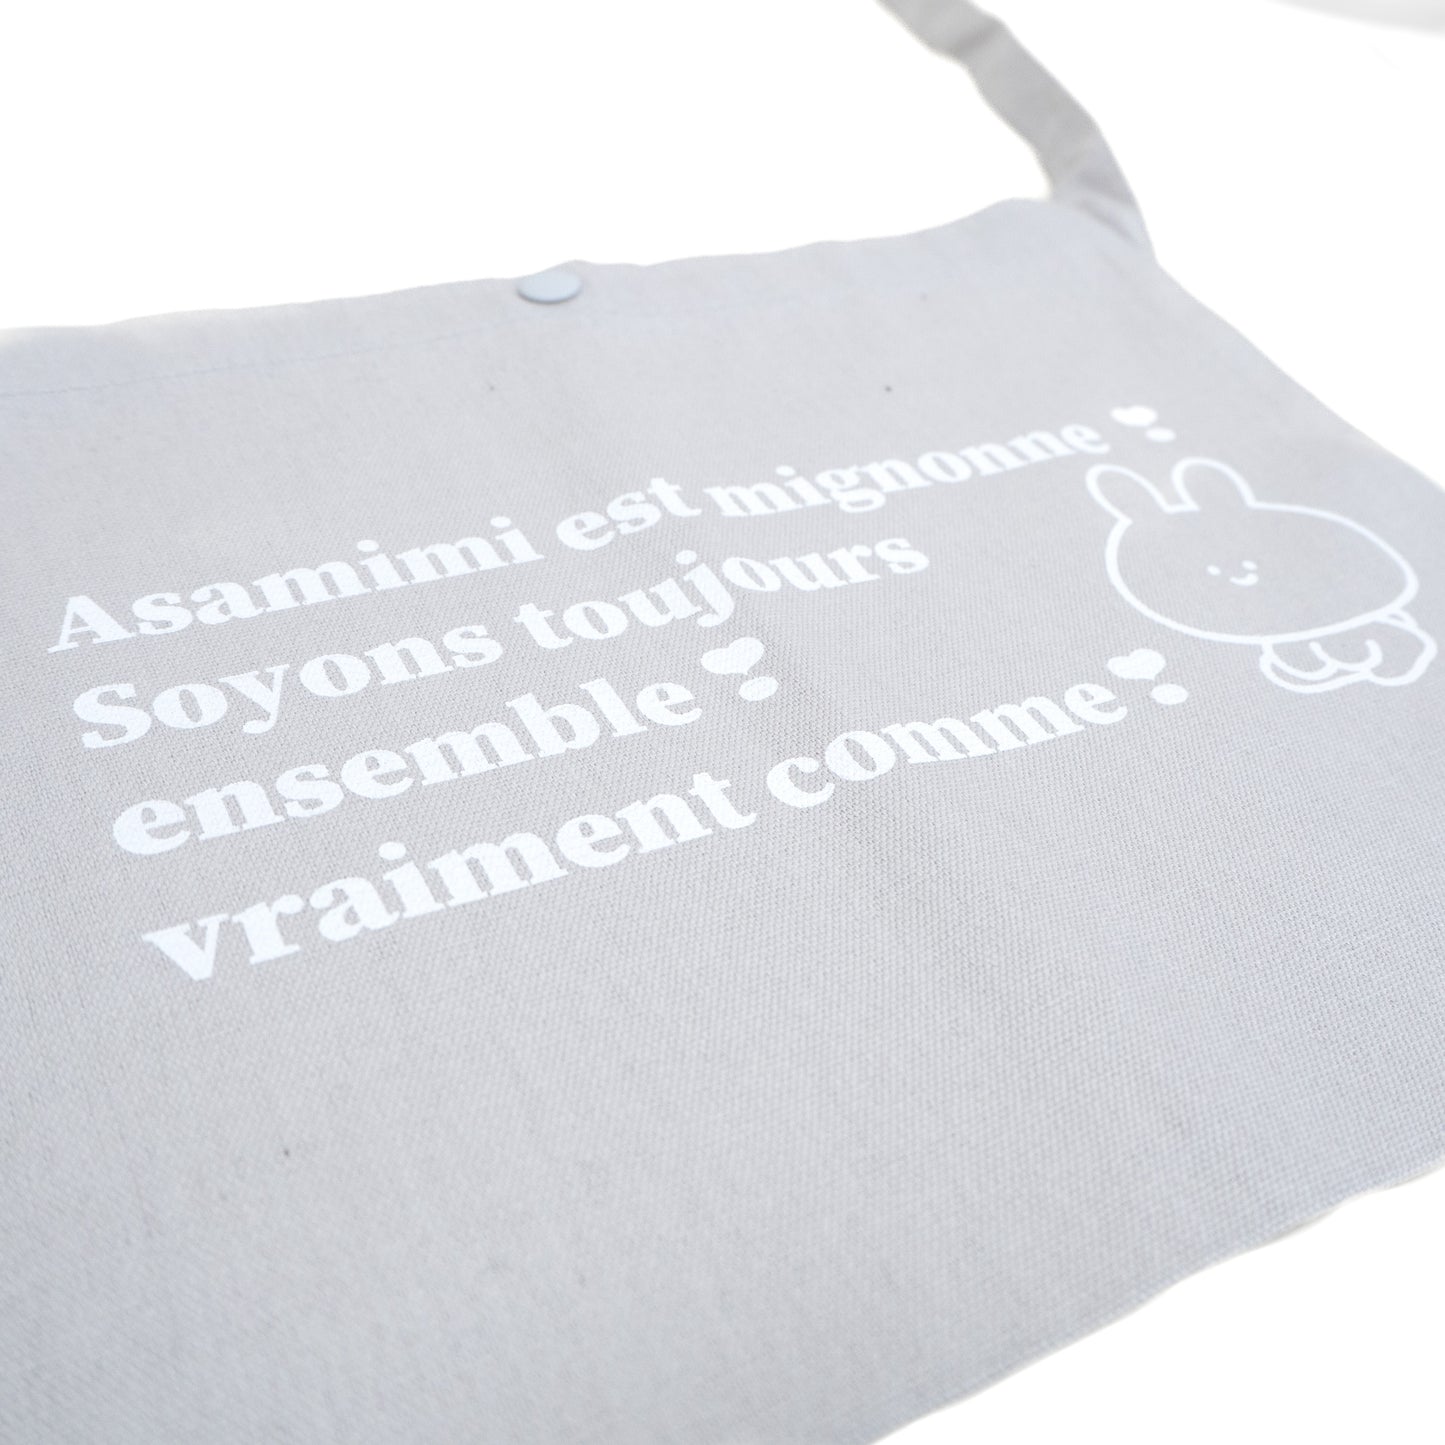 [Asamimi-chan] Sacoche (French Girly) [Shipped in early December]